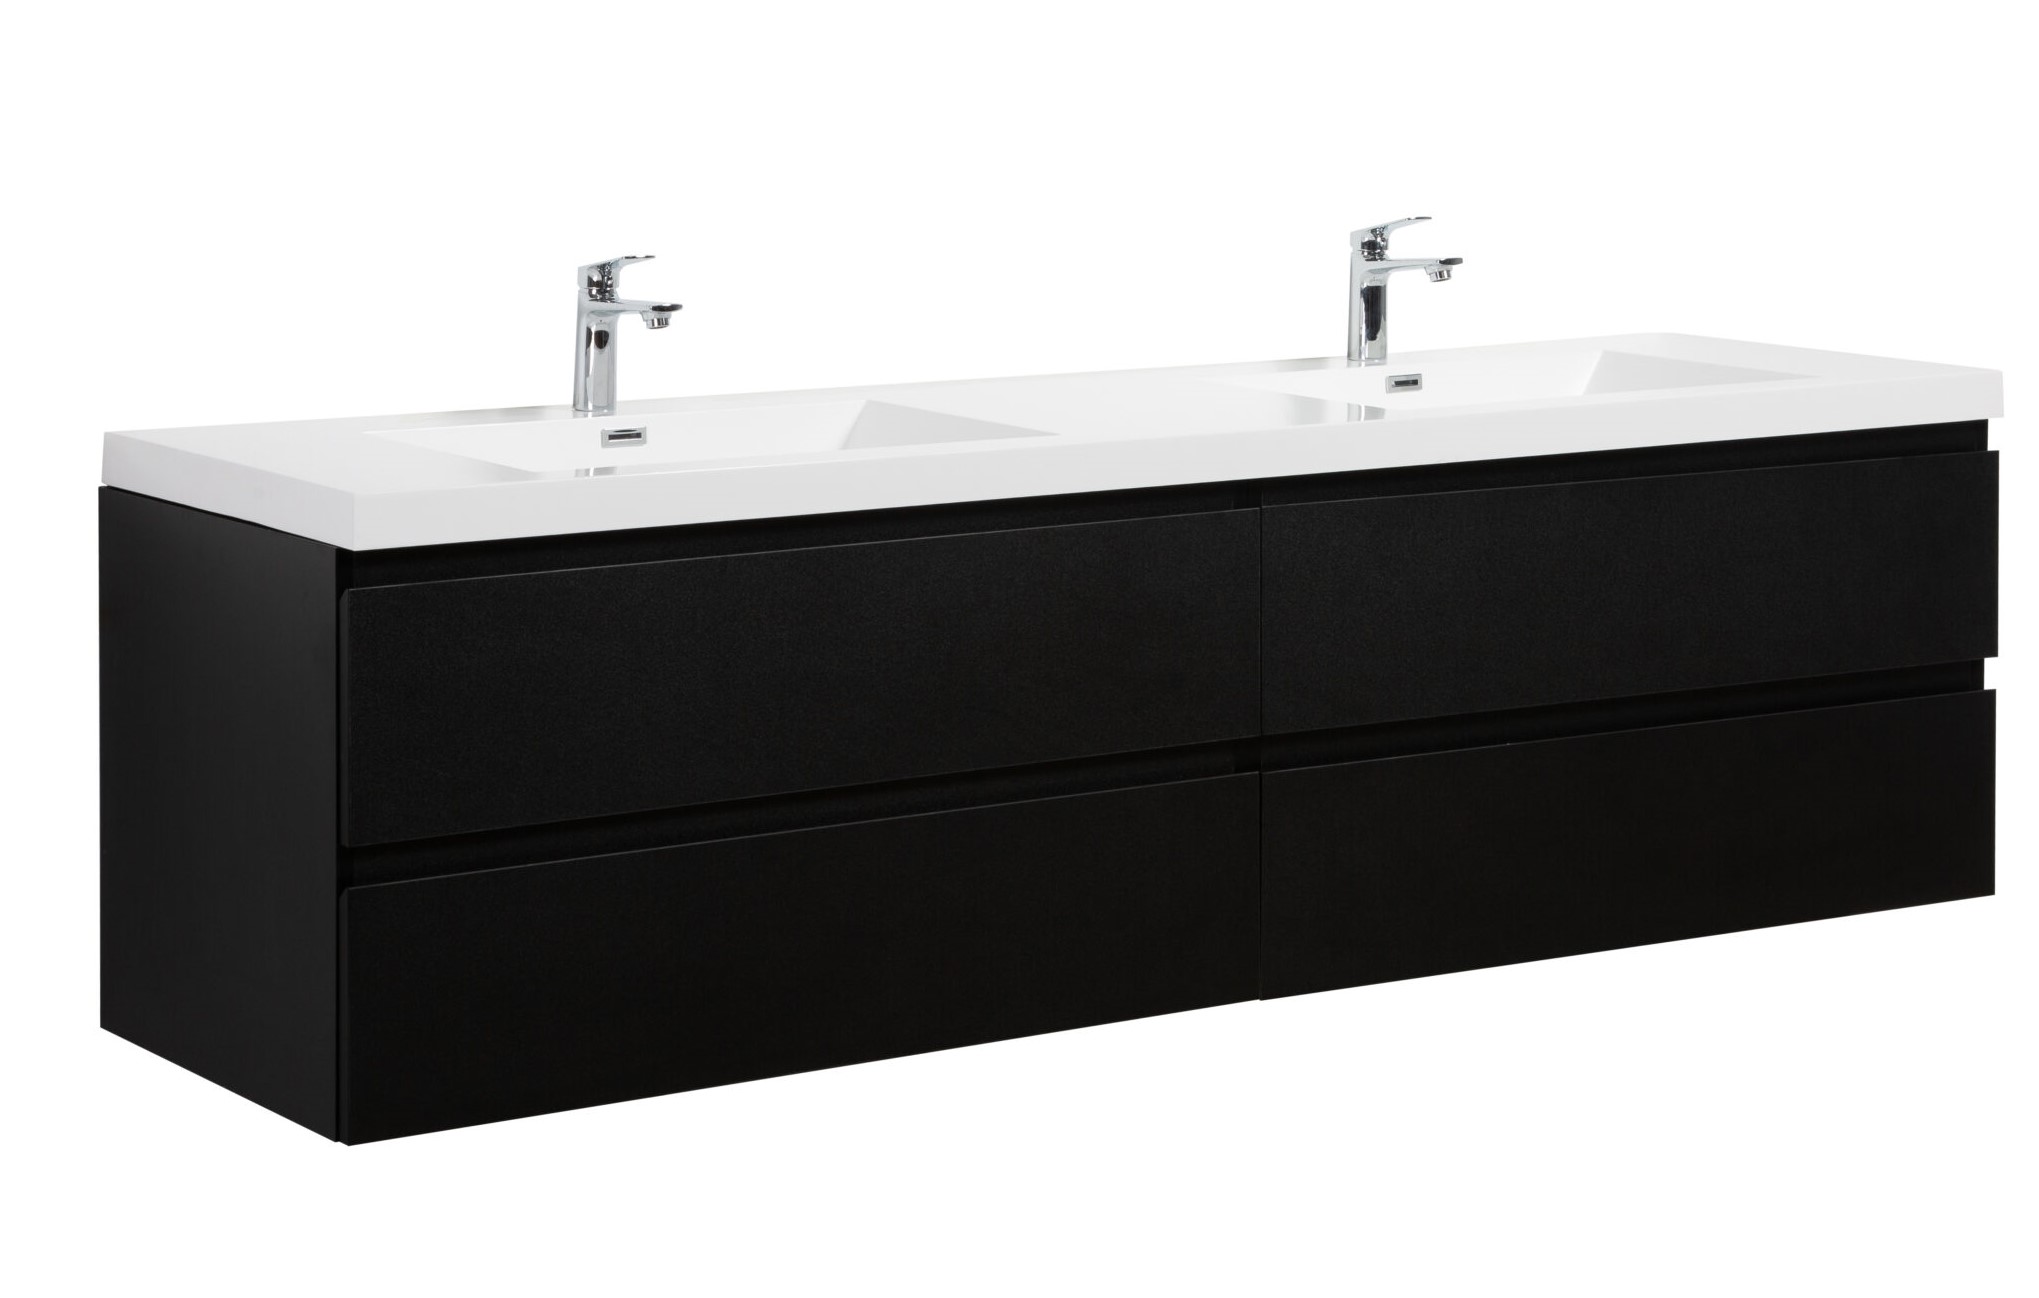 Aurora 84" Matte Midnight Black Wall Hung Double Sink Bathroom Vanity with White Acrylic Countertop